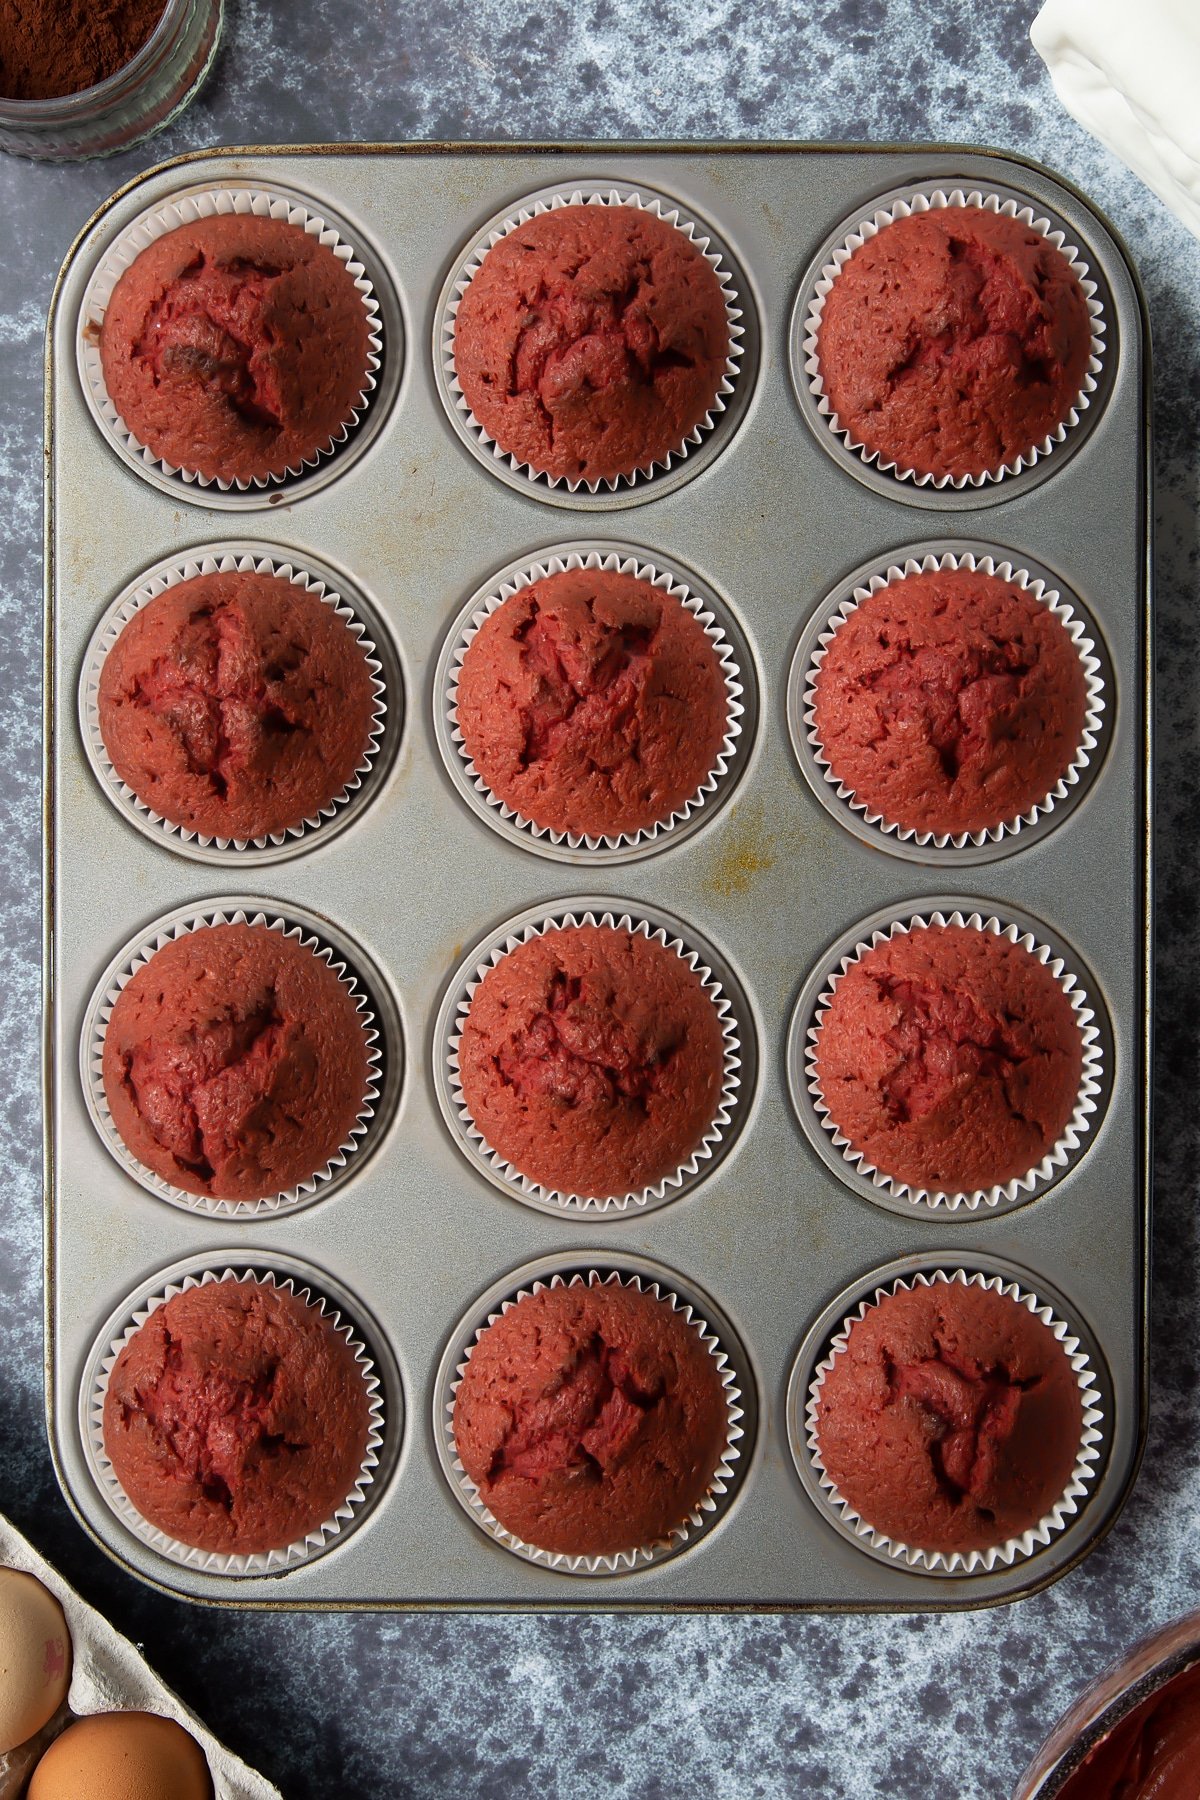 Dairy free red velvet cupcakes in a 12-hole muffin tray. Ingredients to make dairy free Halloween cupcakes surround the tray.